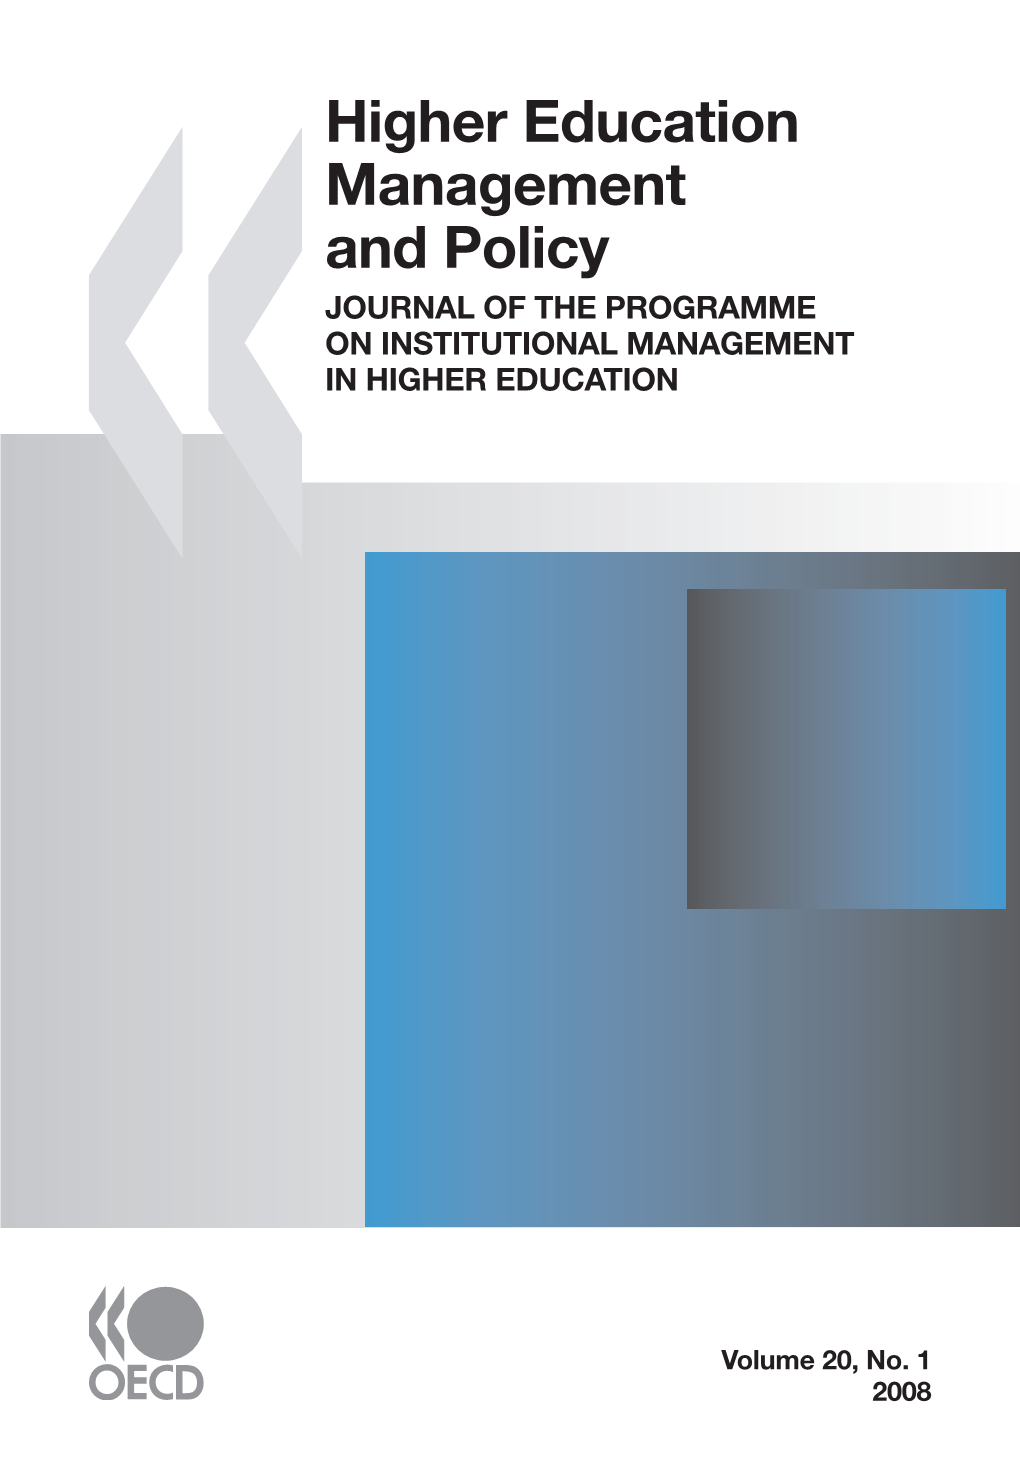 Higher Education Management and Policy